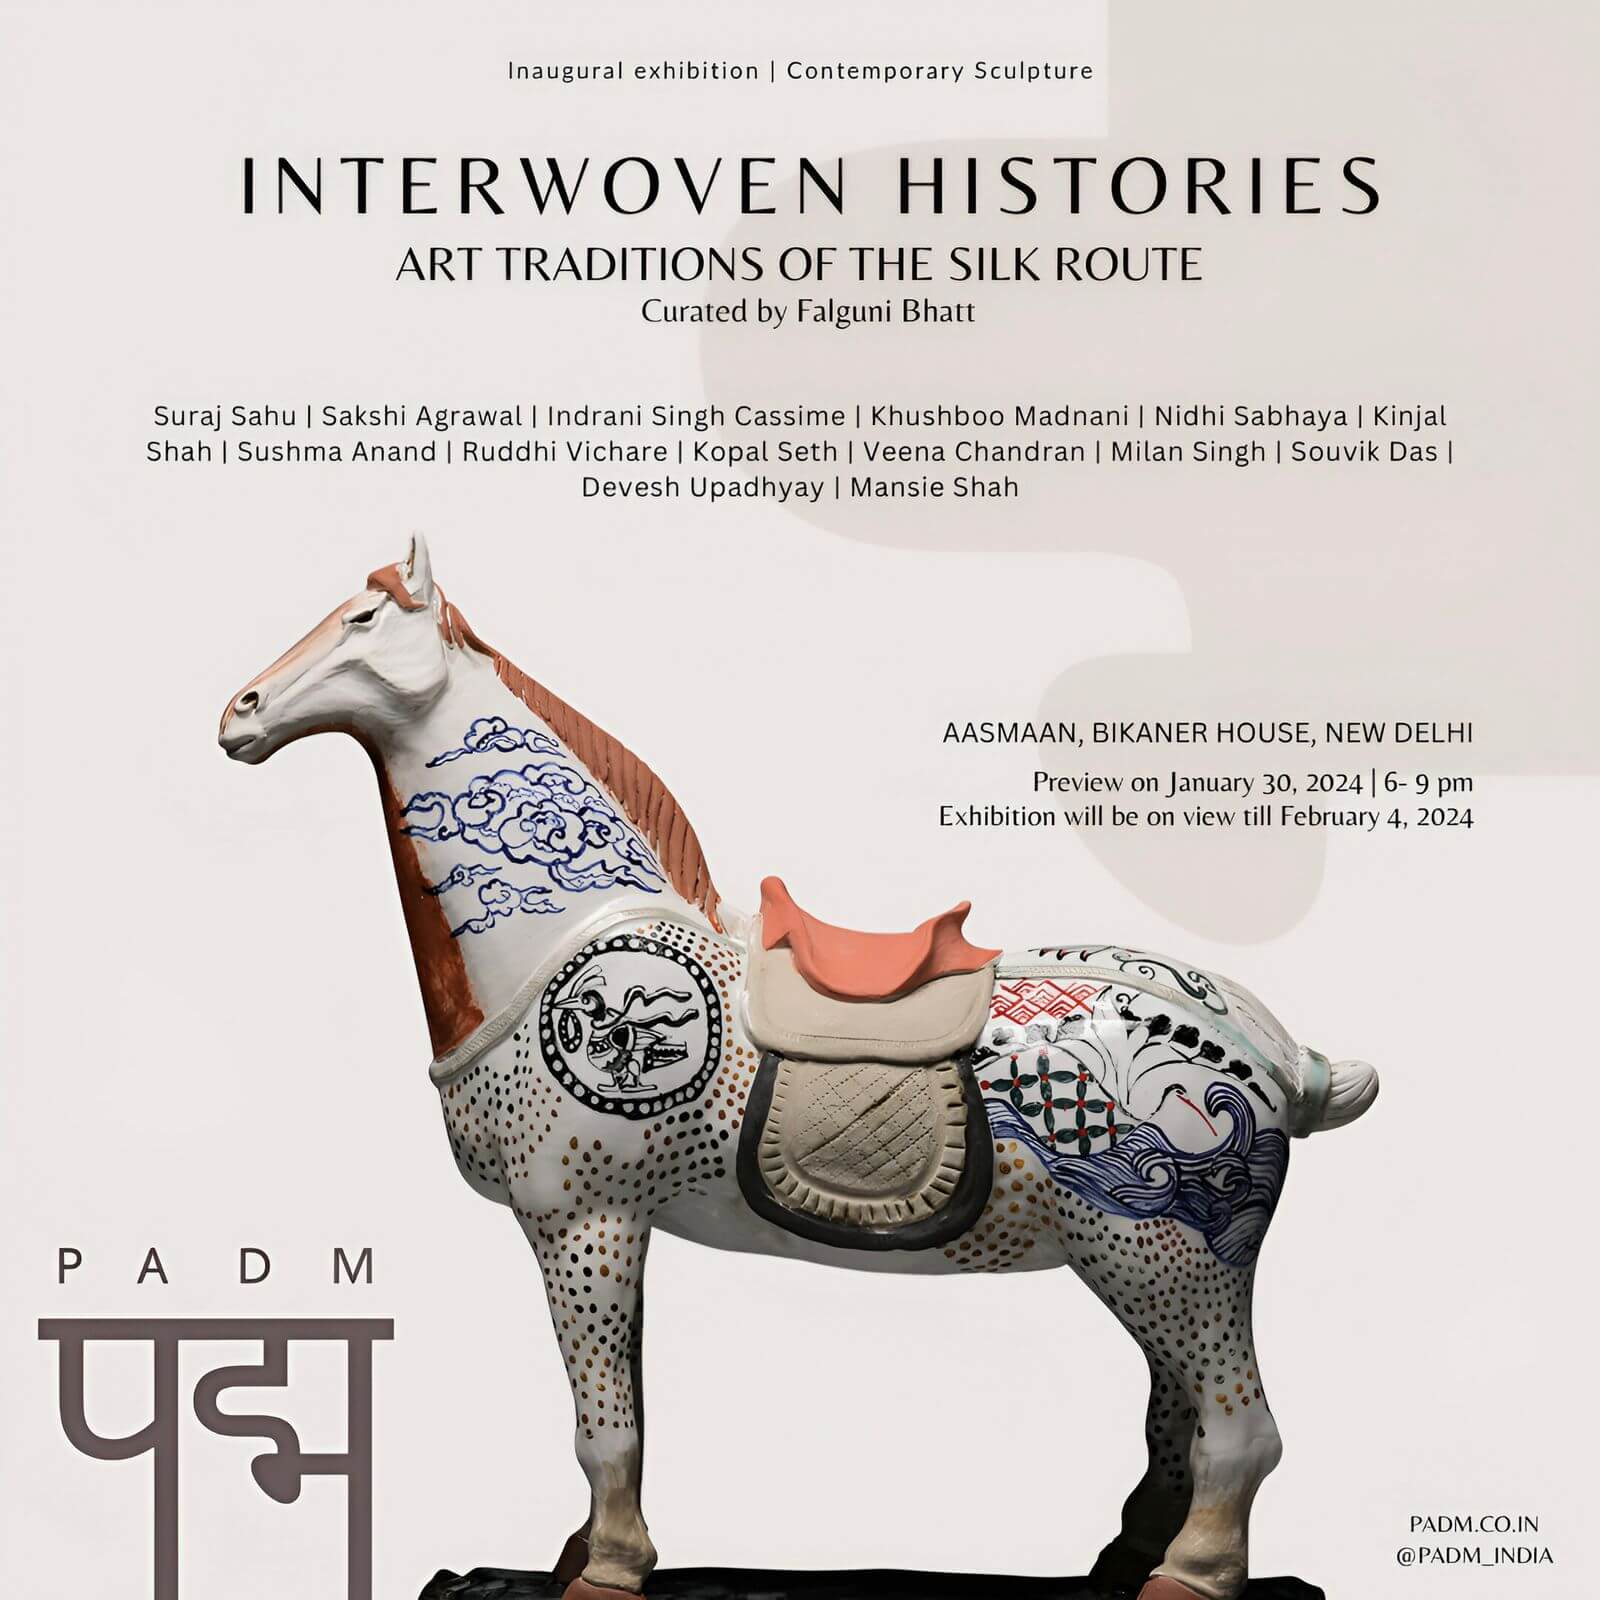 Interwoven Histories: Art Traditions of the Silk Route